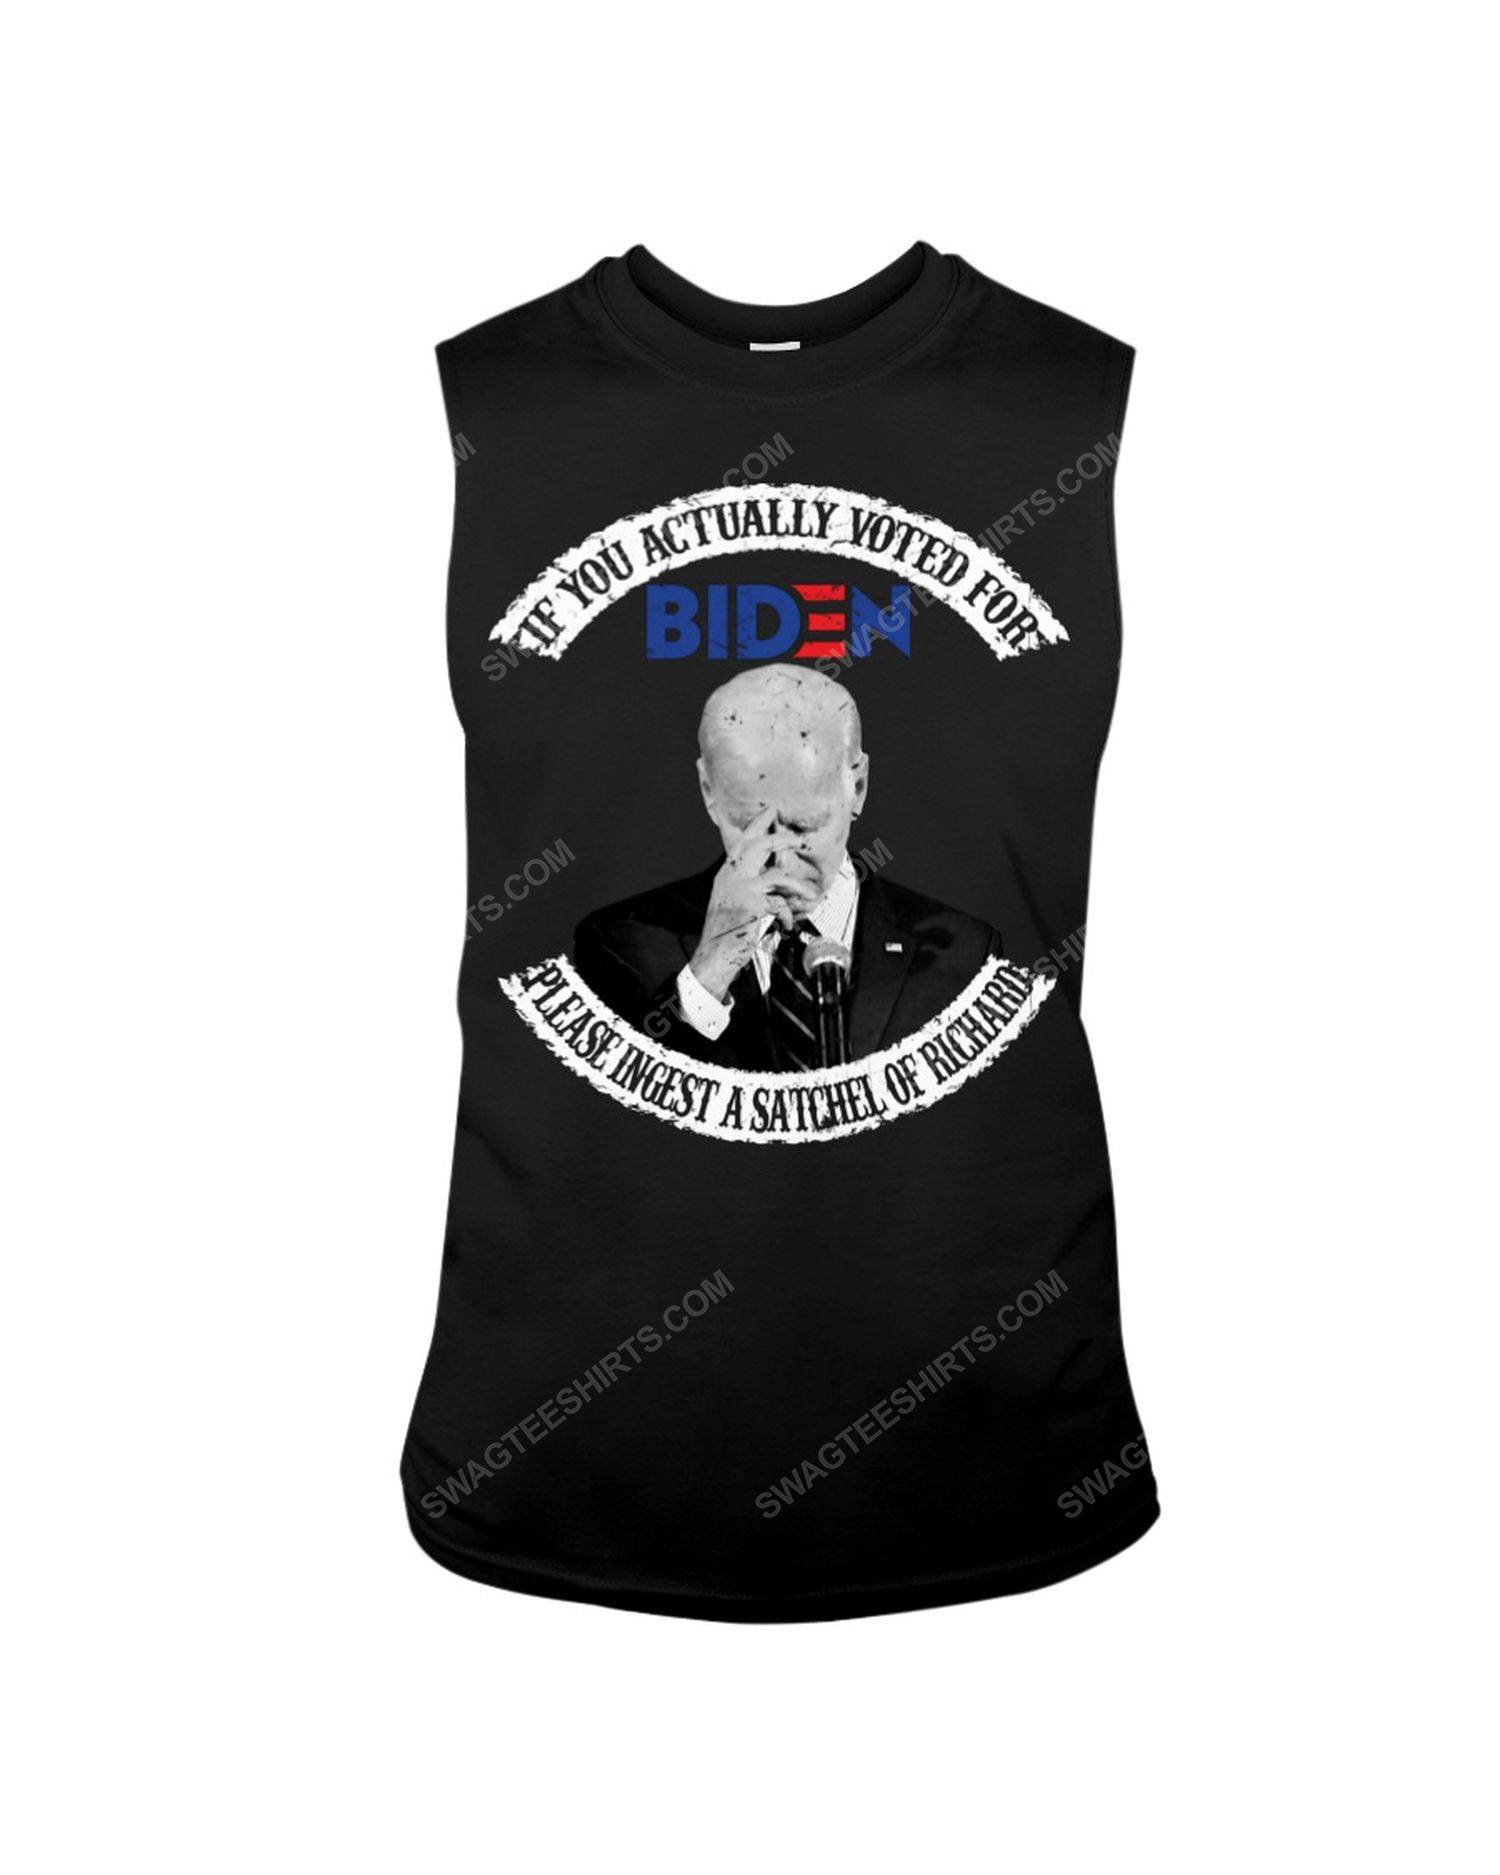 If you actually voted for biden please ingest a satchel of richards political tank top